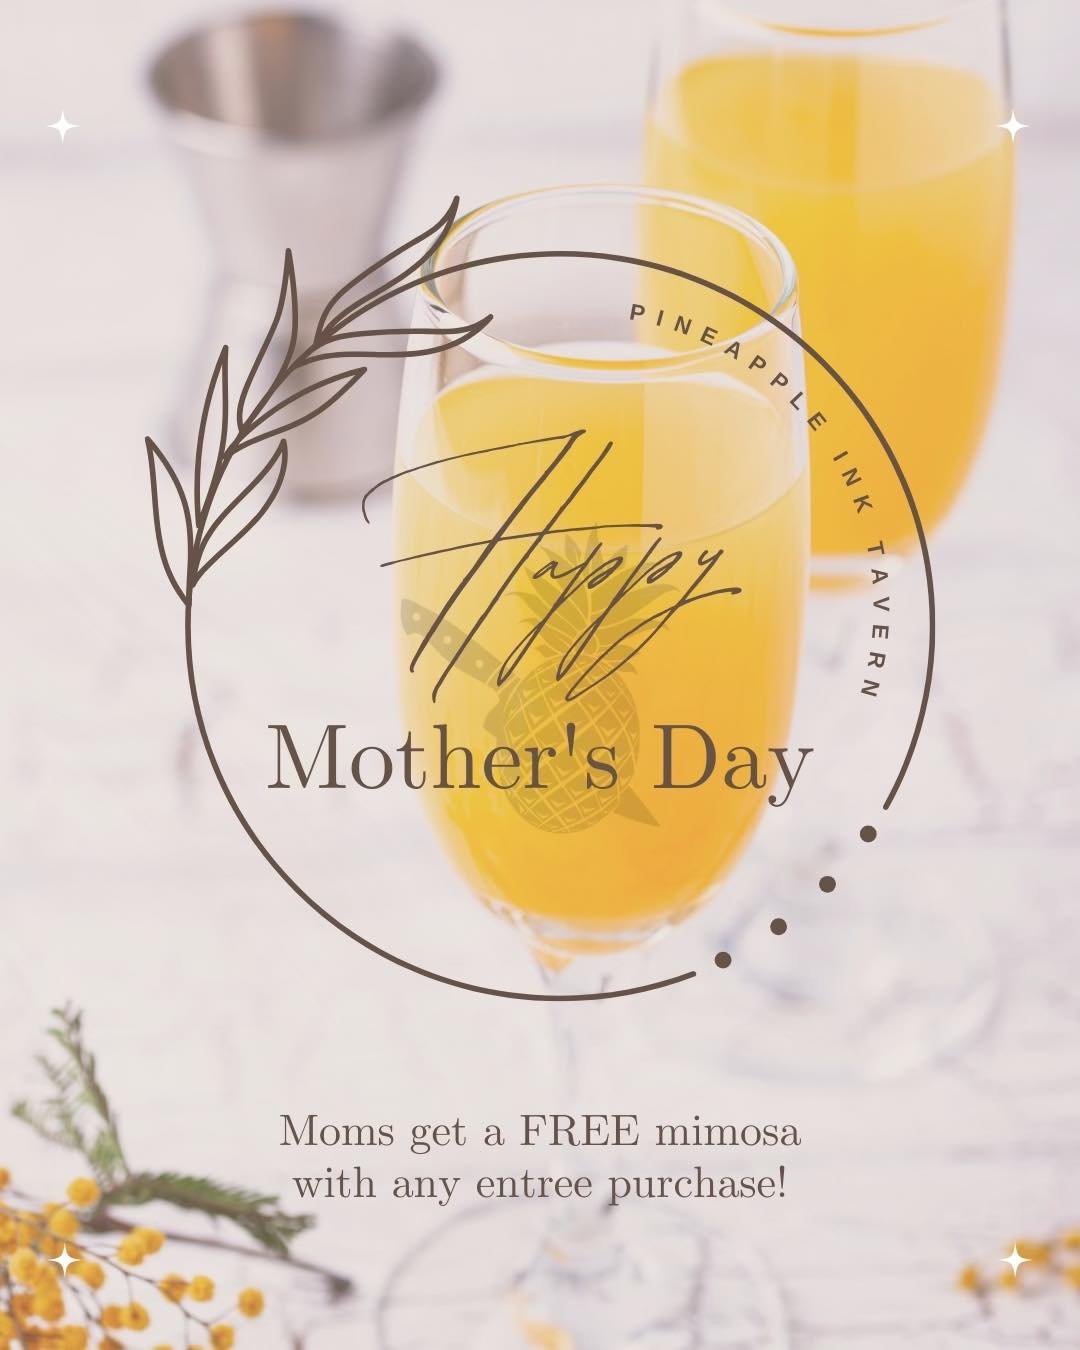 Cheers to all the amazing moms out there! 🥂 Join us on Mother's Day and treat Mom to brunch! This Sunday all moms get a FREE mimosa with any entree purchase. 🍊💛
She deserves to be celebrated in style! 

#MothersDay #MimosaLove #PineappleInkTavern